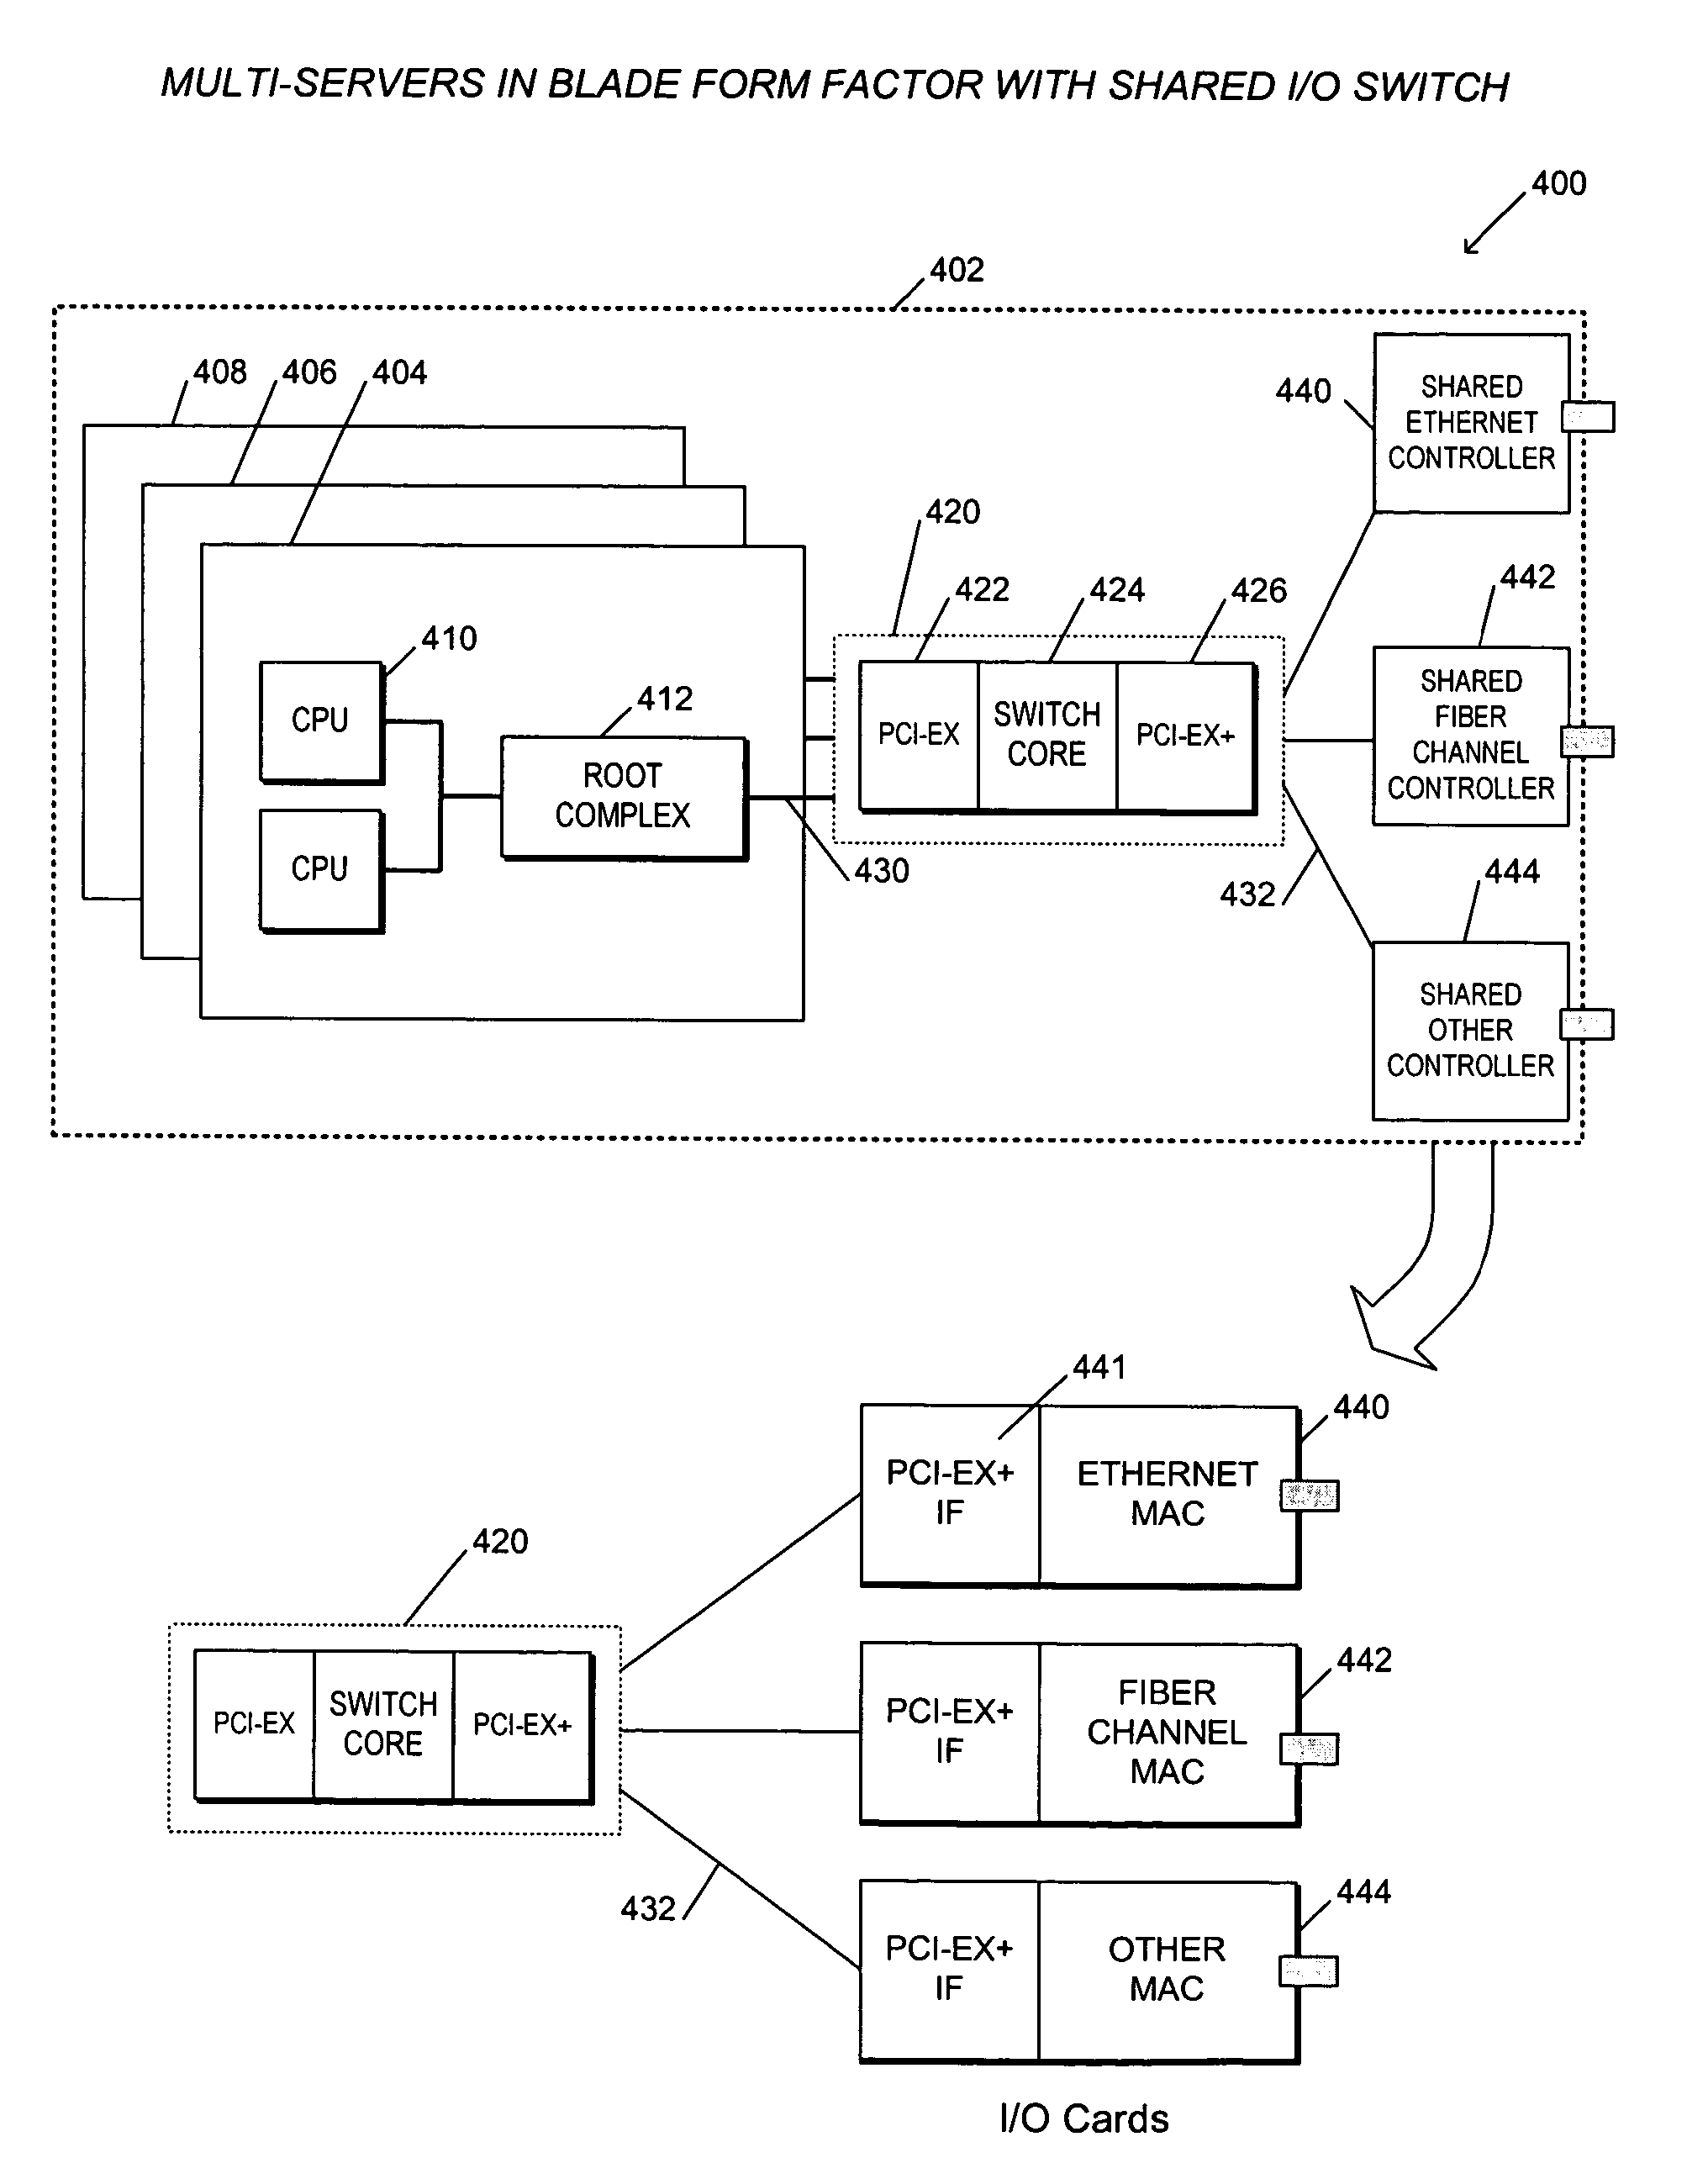 Apparatus and method for sharing I/O endpoints within a load store fabric by encapsulation of domain information in transaction layer packets